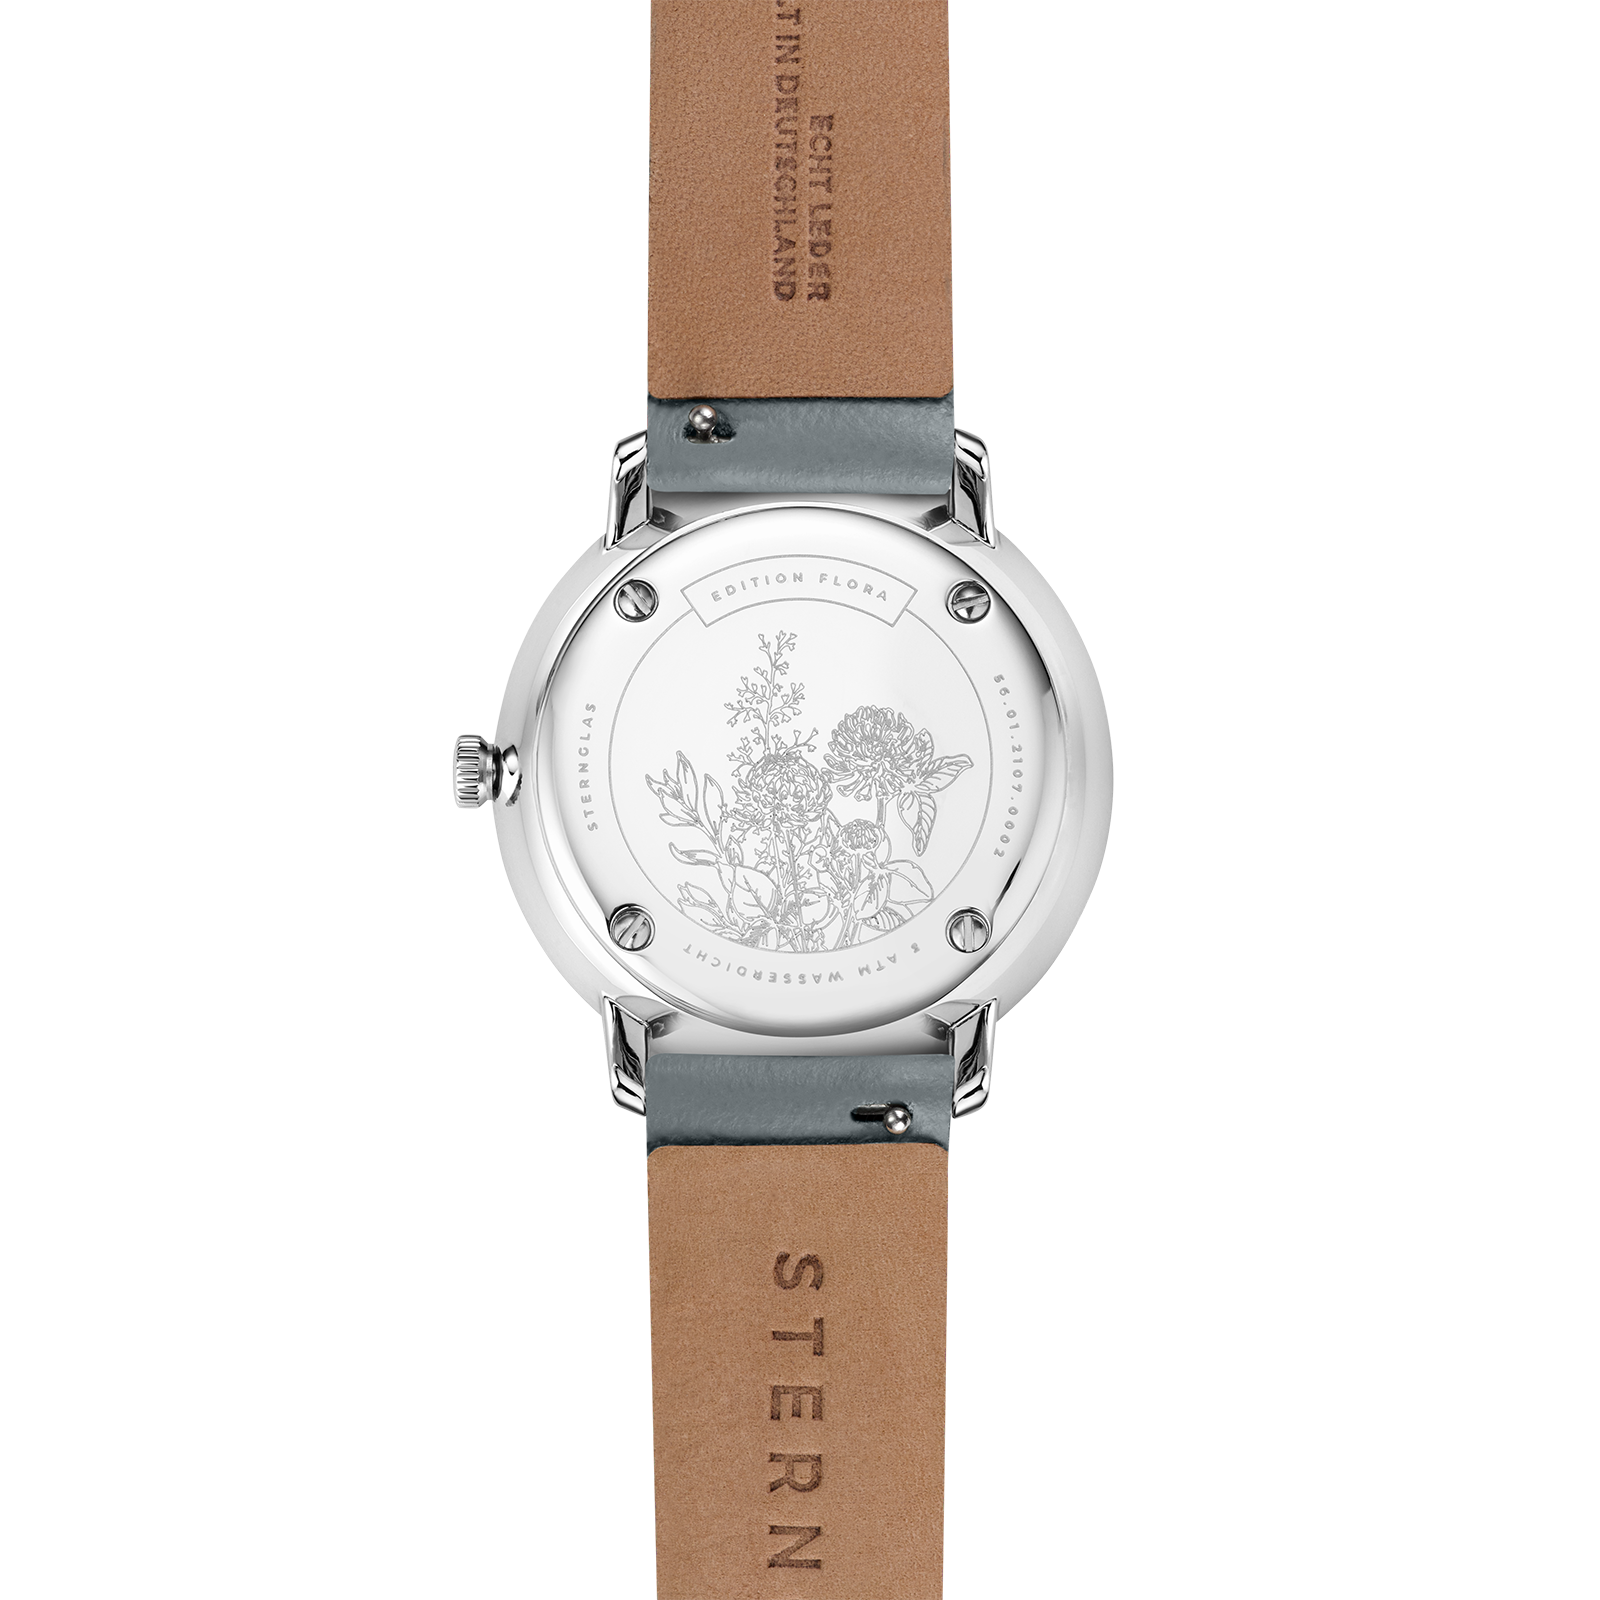 Sternglas Naos Edition XS - Edition Flora